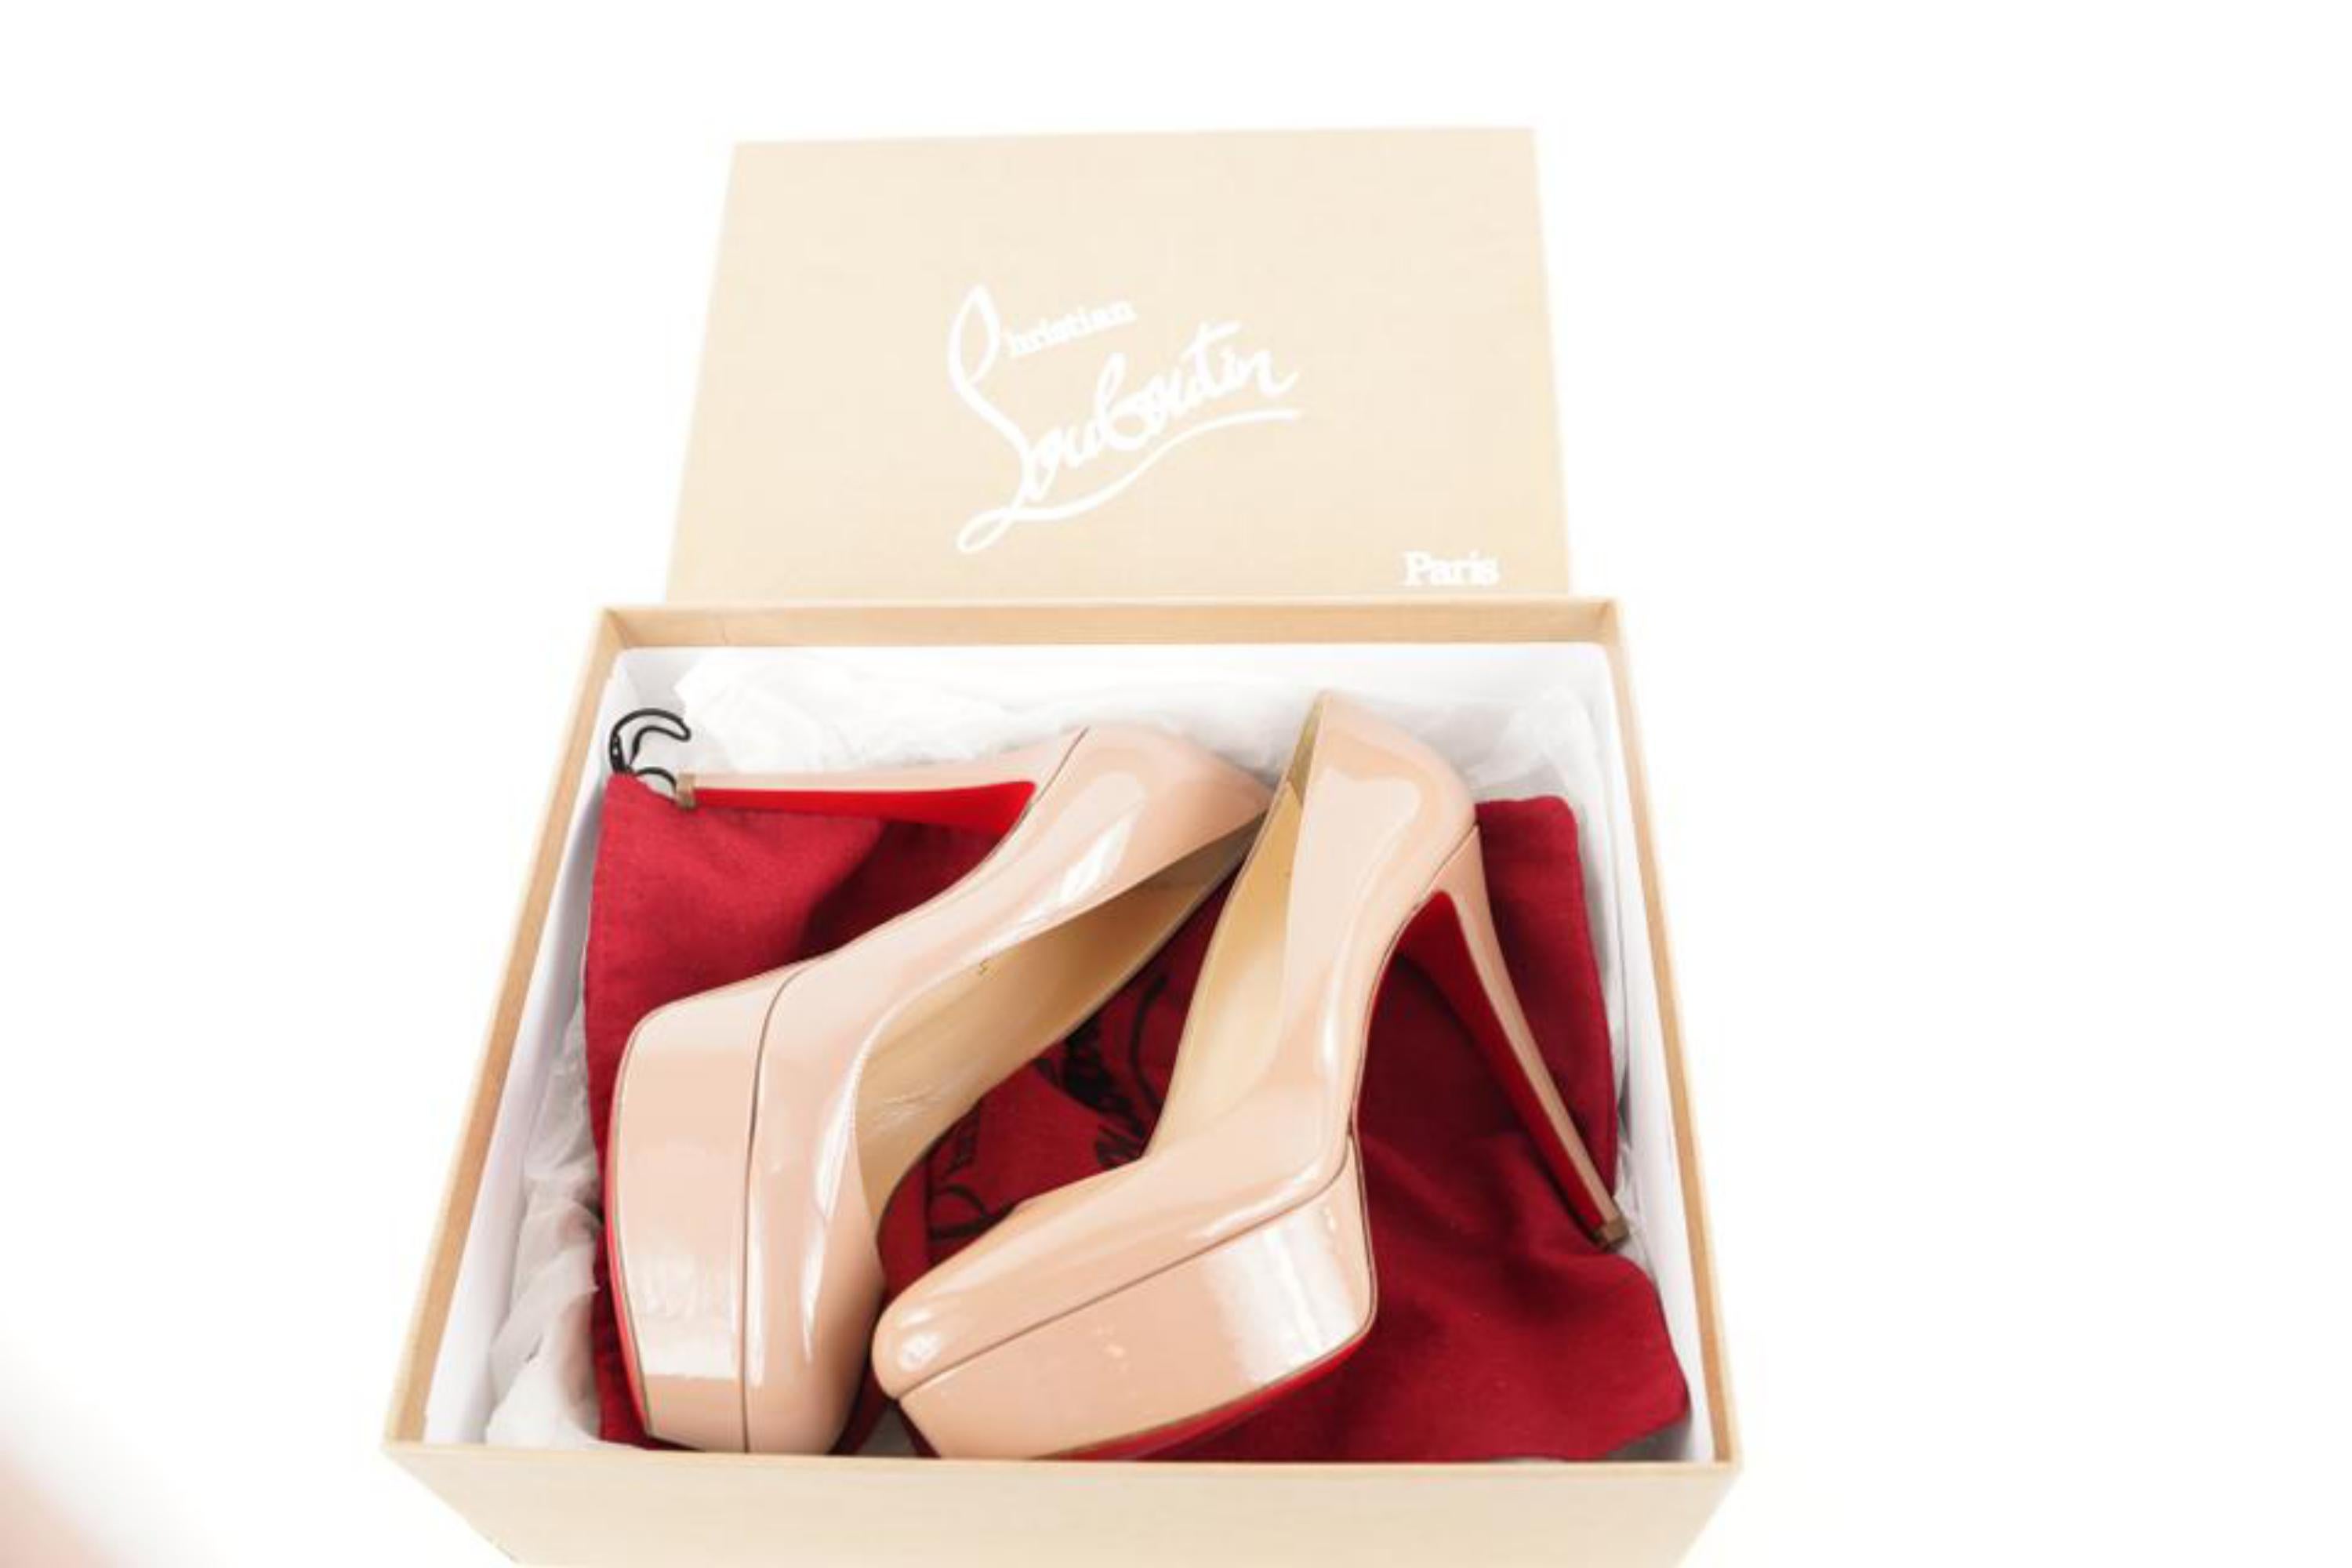 Christian Louboutin Size 39.5 Nude Bianca 120 Patent Calf Heels 4CL928 For Sale 5